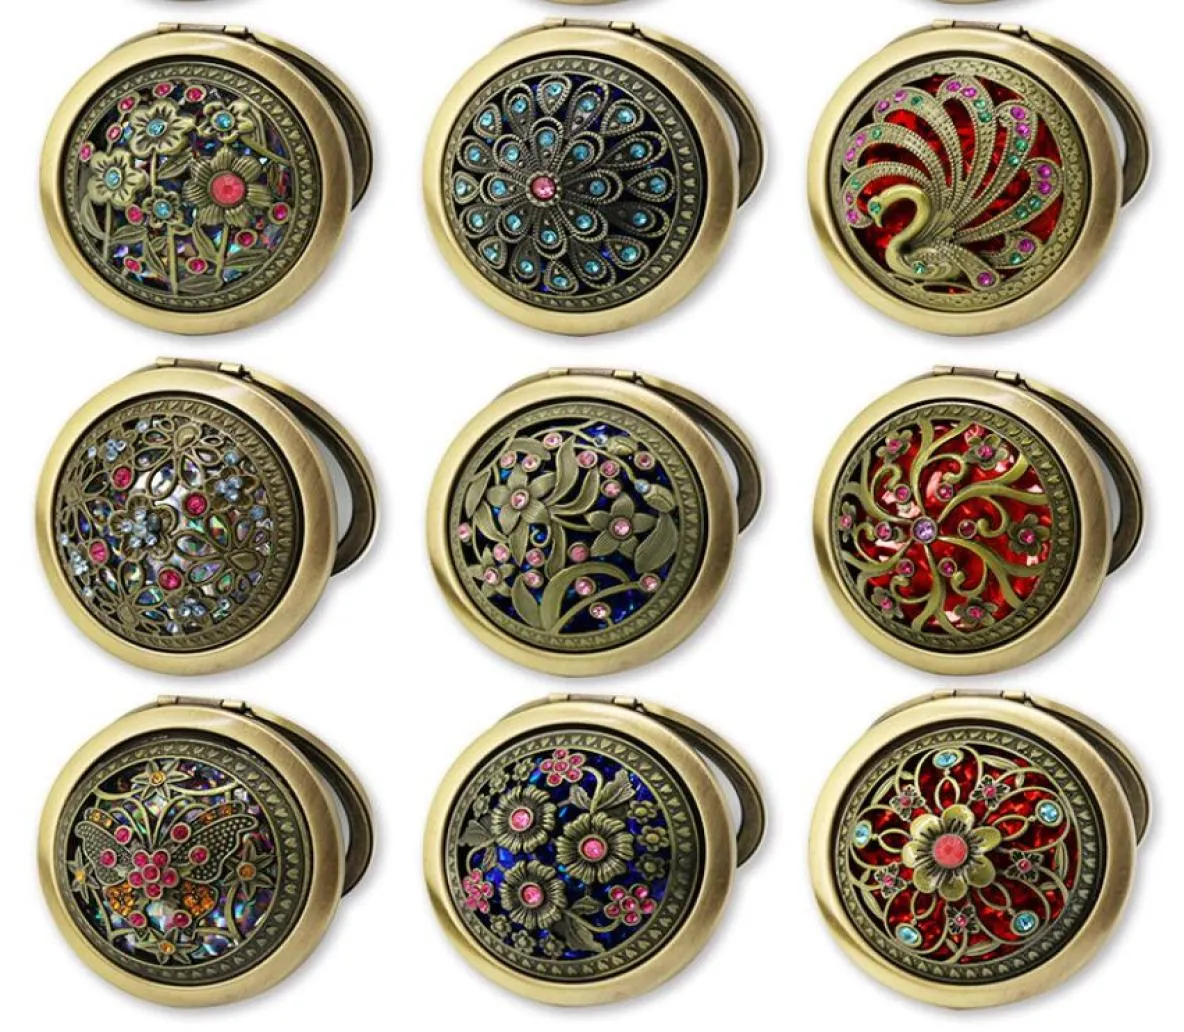 Mini Pocket Retro Vintage Style ButterflyflowerPeacock Makeup Cosmetic Pocket Compact Stainless Mirror DHL 8434743